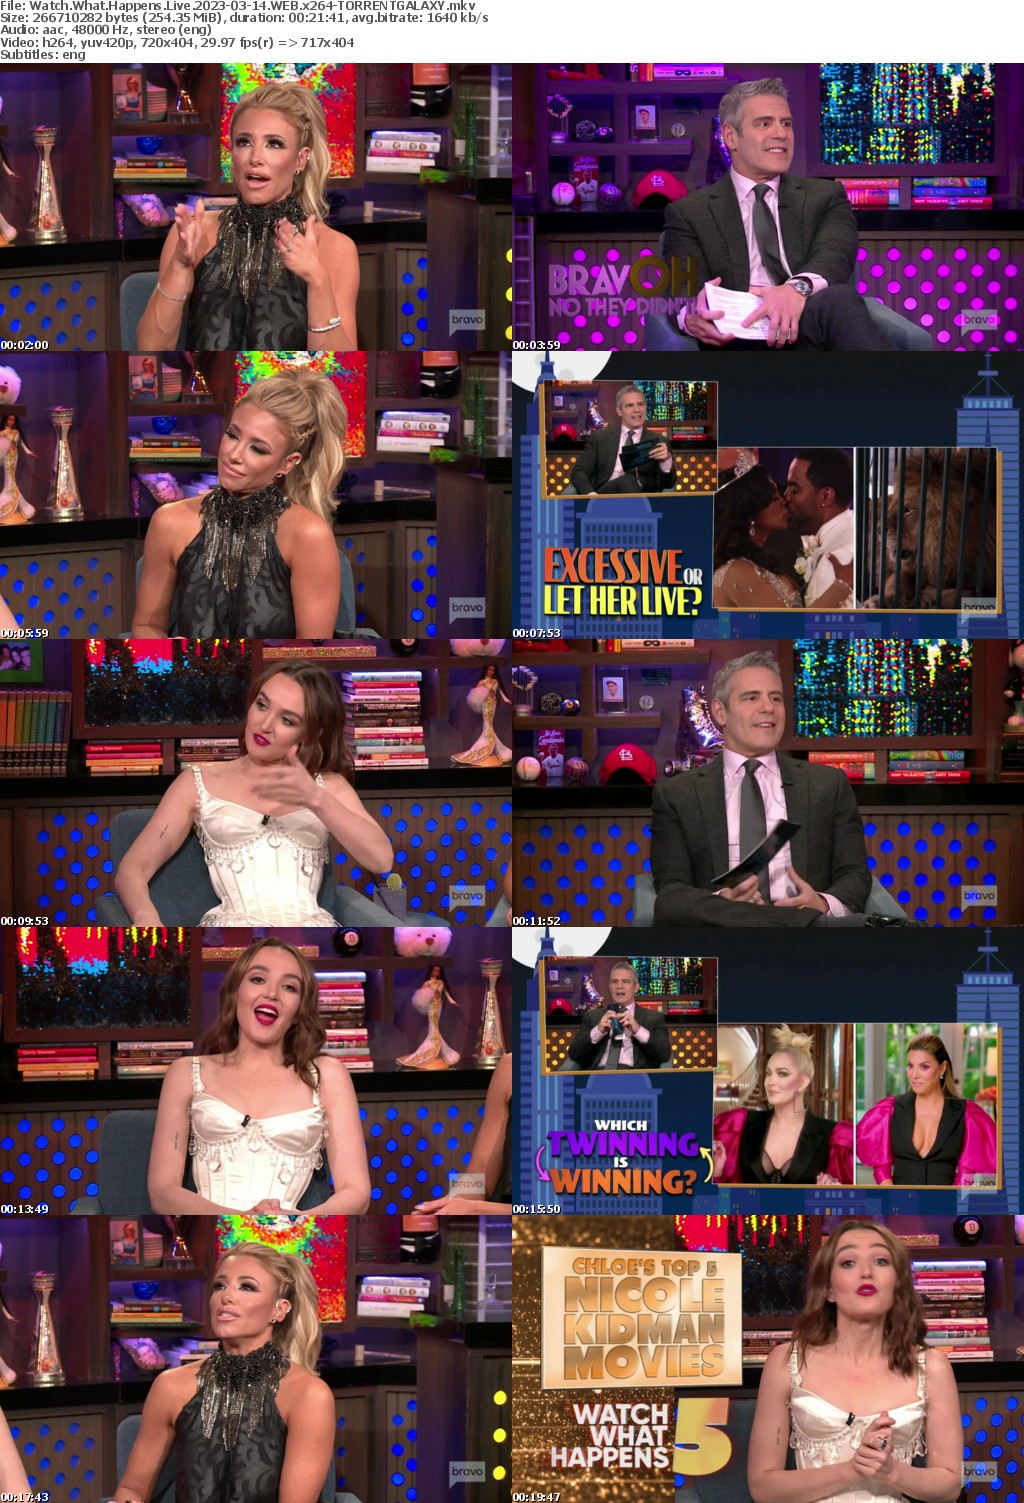 Watch What Happens Live 2023-03-14 WEB x264-GALAXY